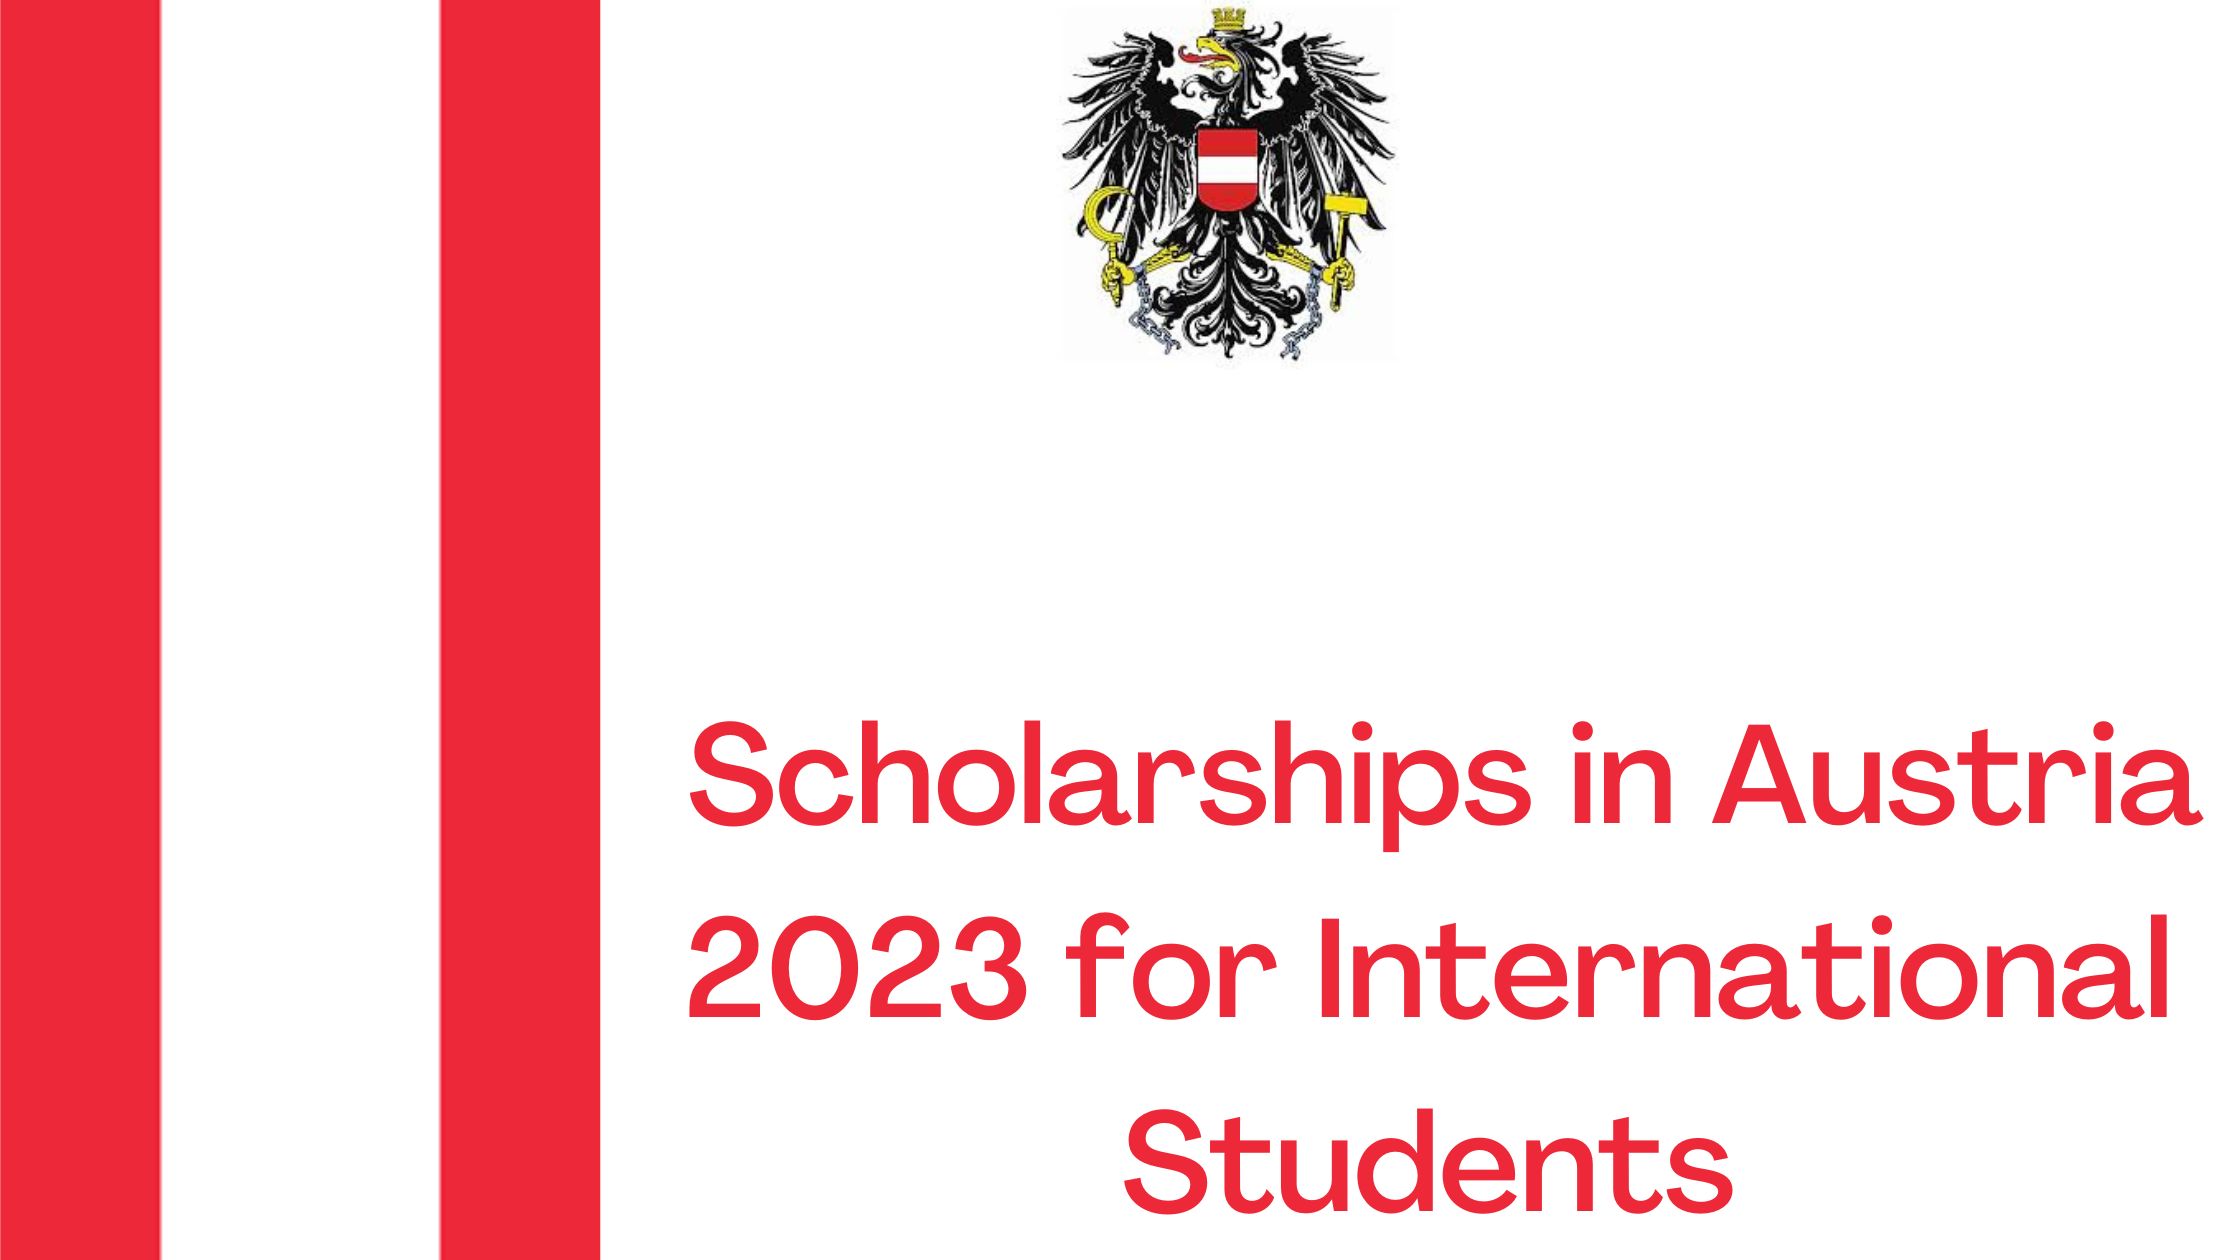 Scholarships in Austria 2023 for International Students | Study in